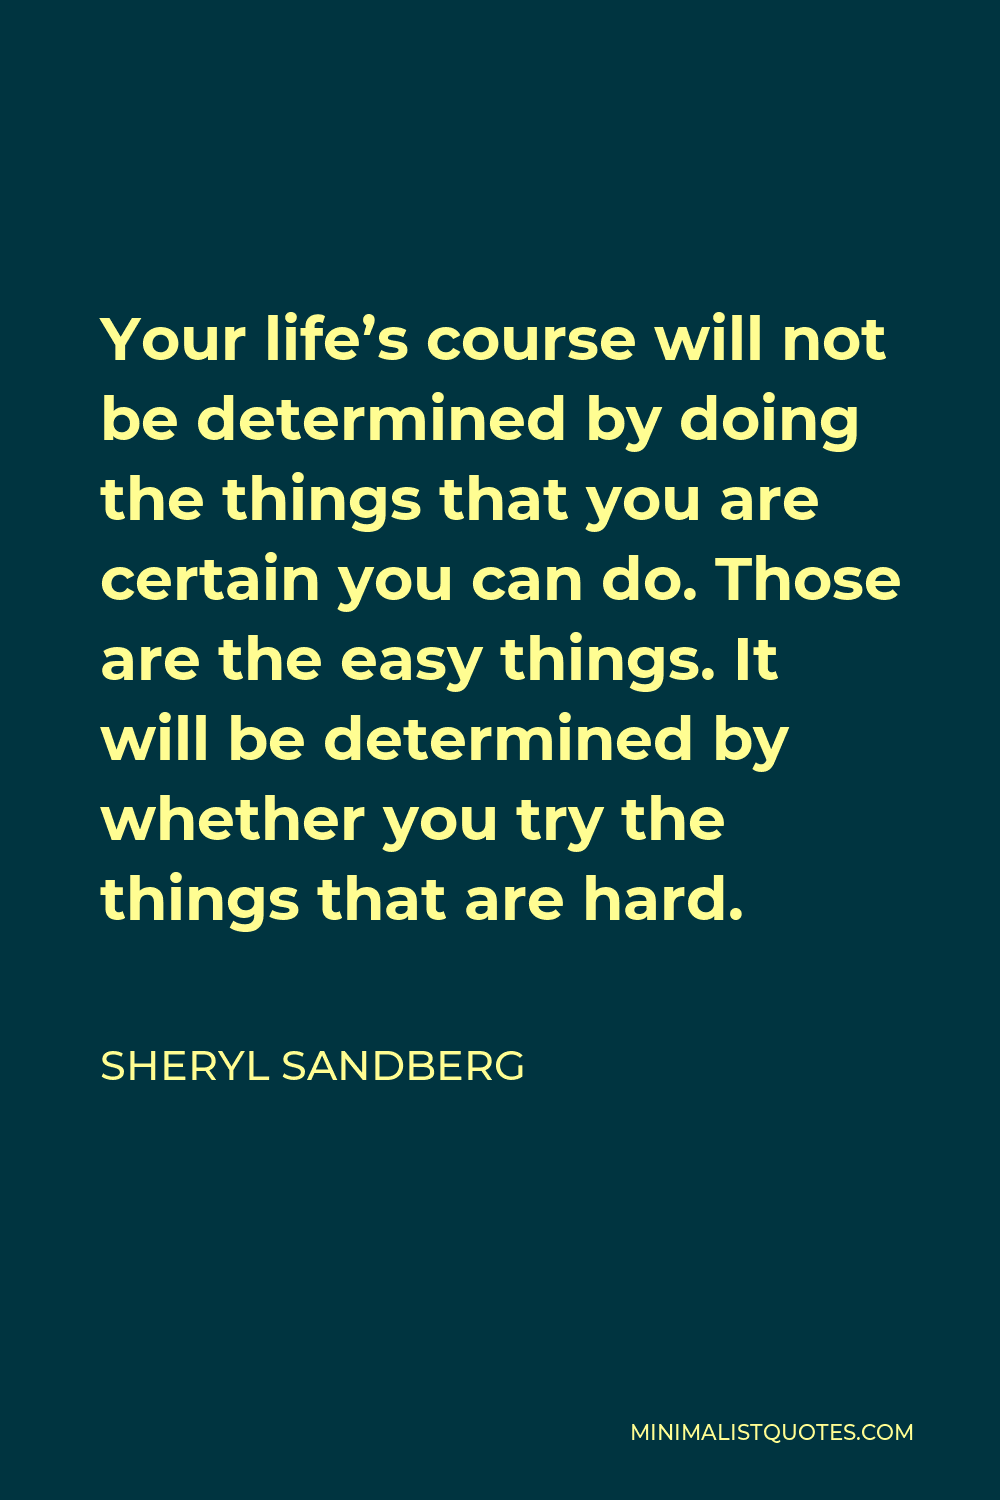 Sheryl Sandberg Quote - Your life’s course will not be determined by doing the things that you are certain you can do. Those are the easy things. It will be determined by whether you try the things that are hard.